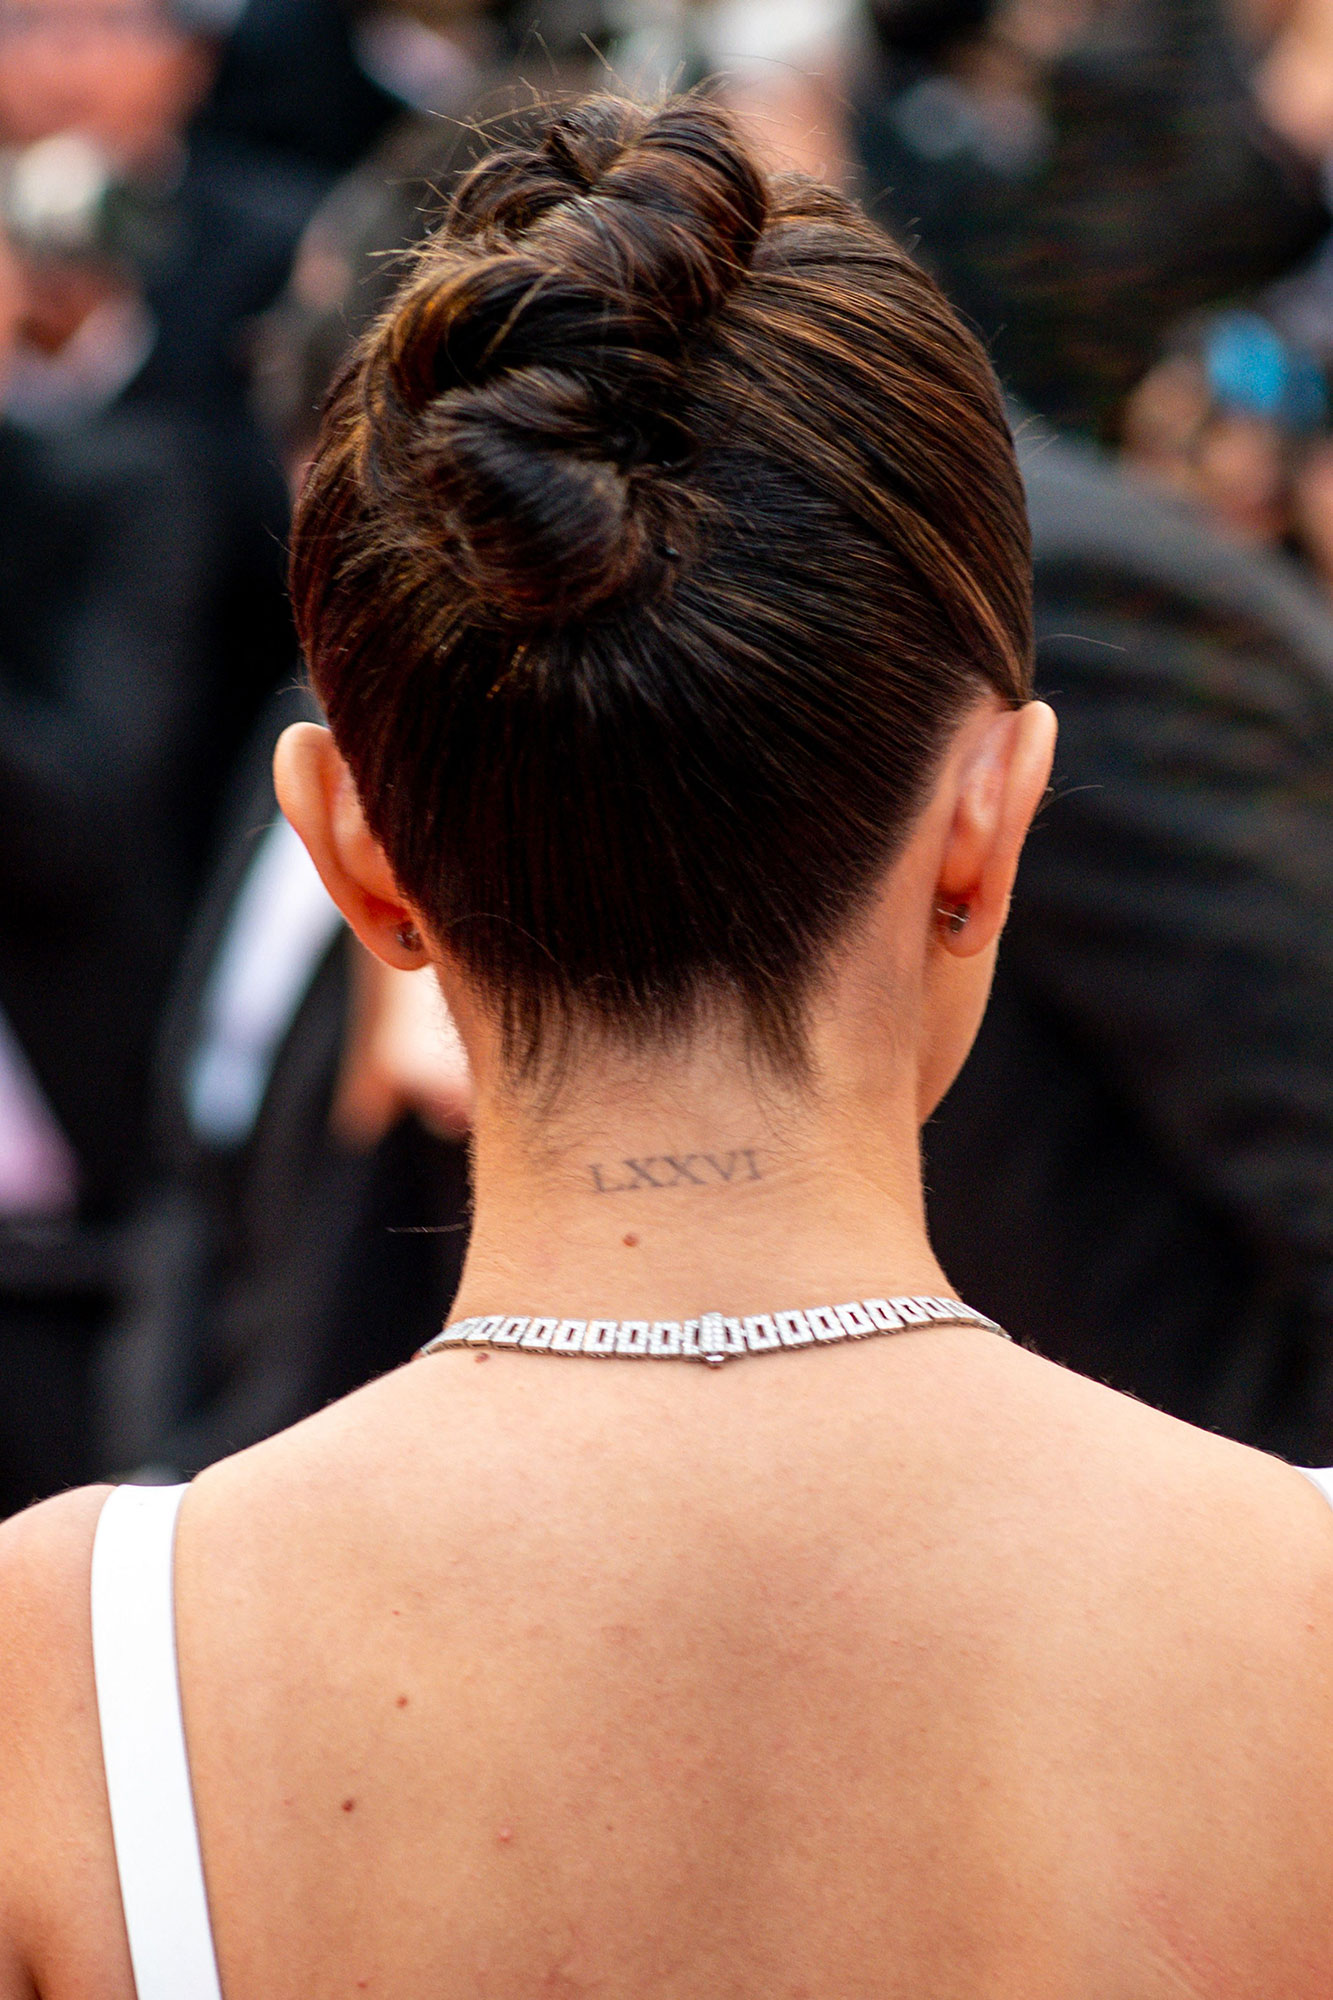 The Secret Meanings Behind These 18 Celebrity Tattoos